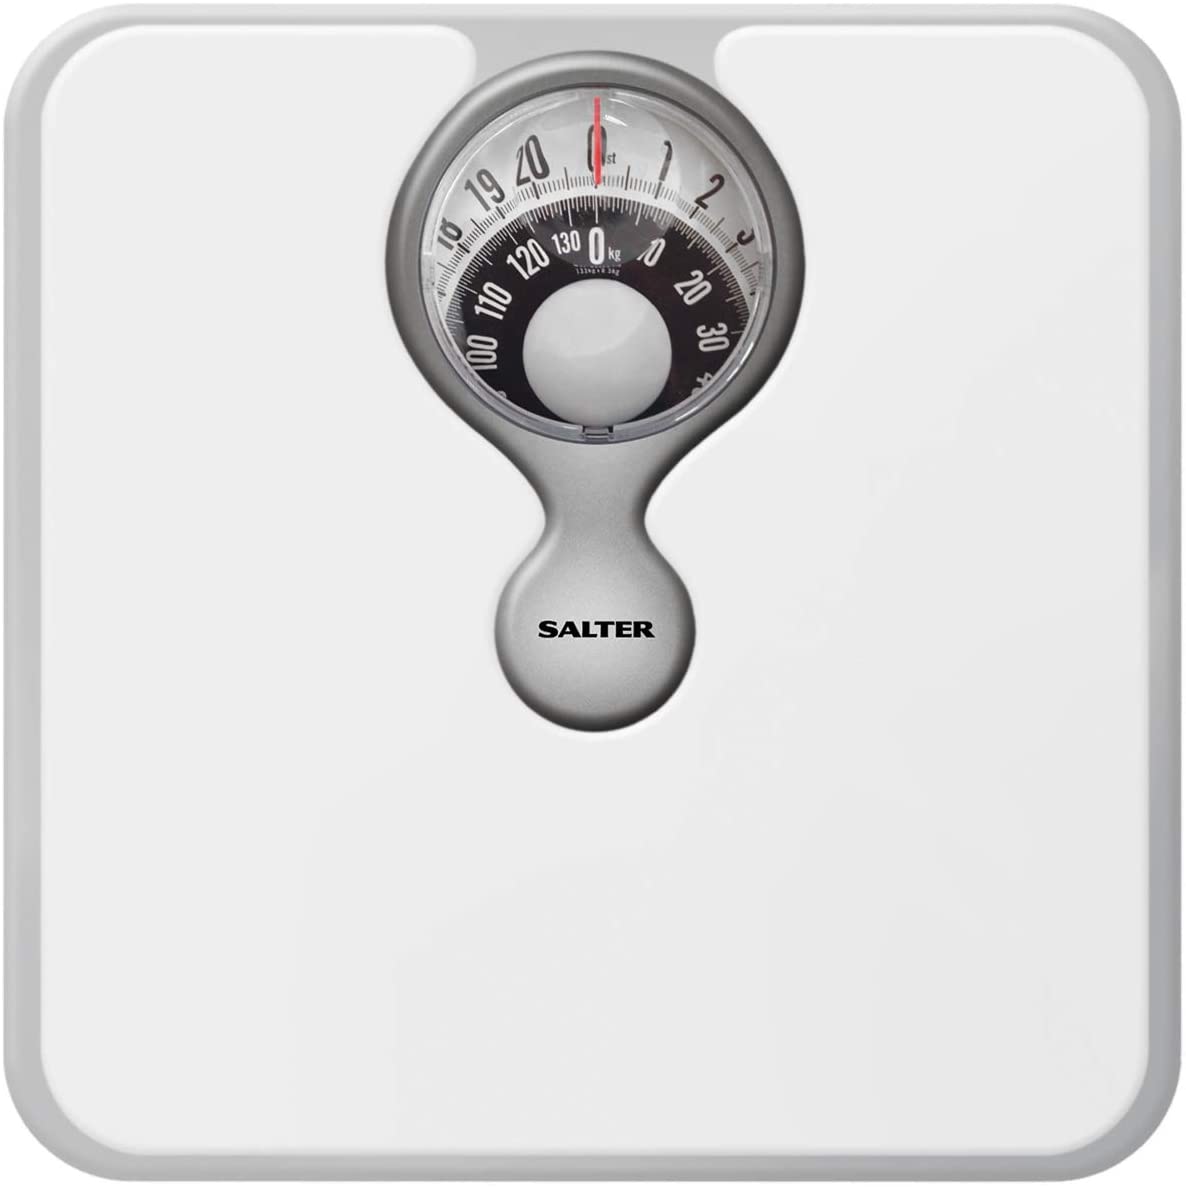 Salter Easy to Read Magnified Bathroom Scales